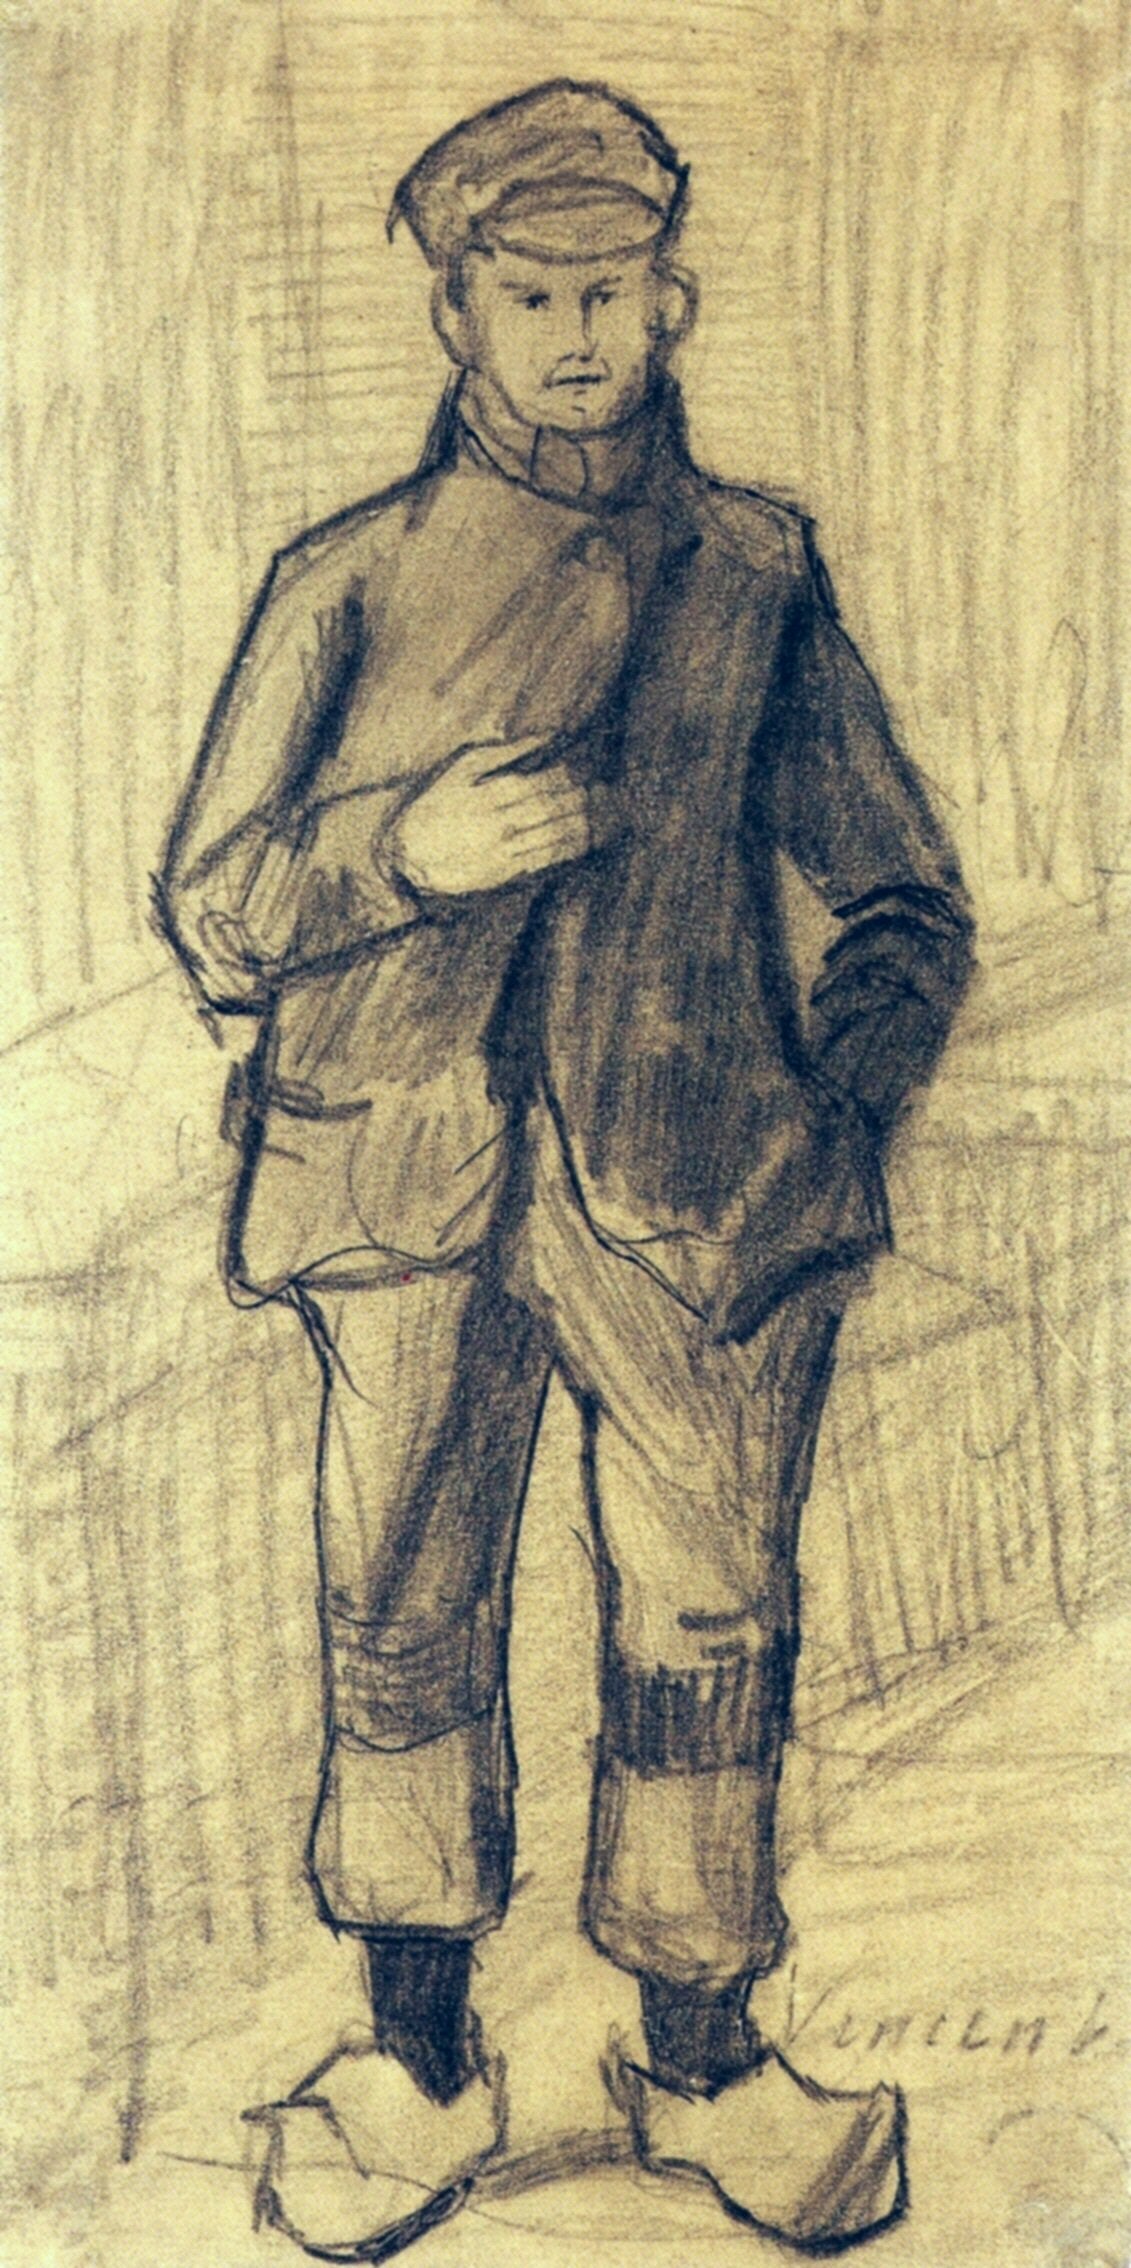 Boy with Cap and Clogs